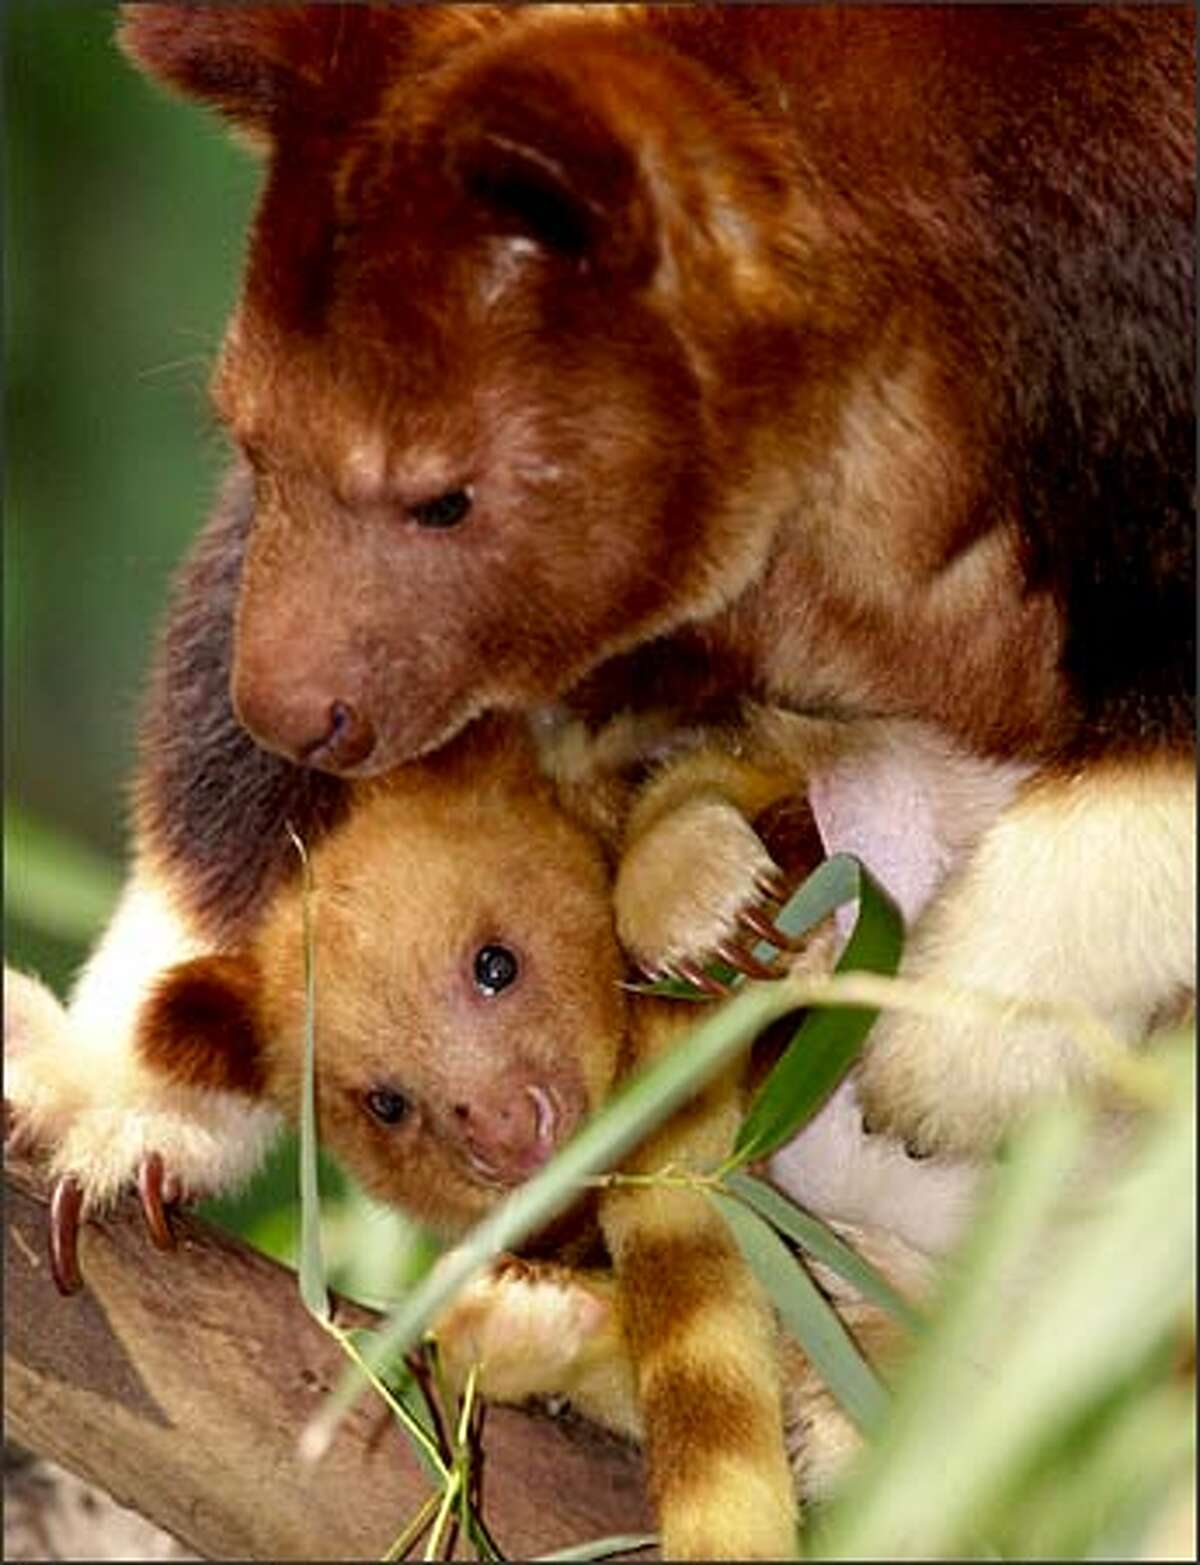 A baby Goodfellow's tree kangaroo peeks from its mother's pouch at the Cleveland Metroparks Zoo Tuesday in Cleveland. The rare marsupial, a native of New Guinea, was the size of a lima bean at birth in June 2002 and went undetected by zoo keepers for several months.